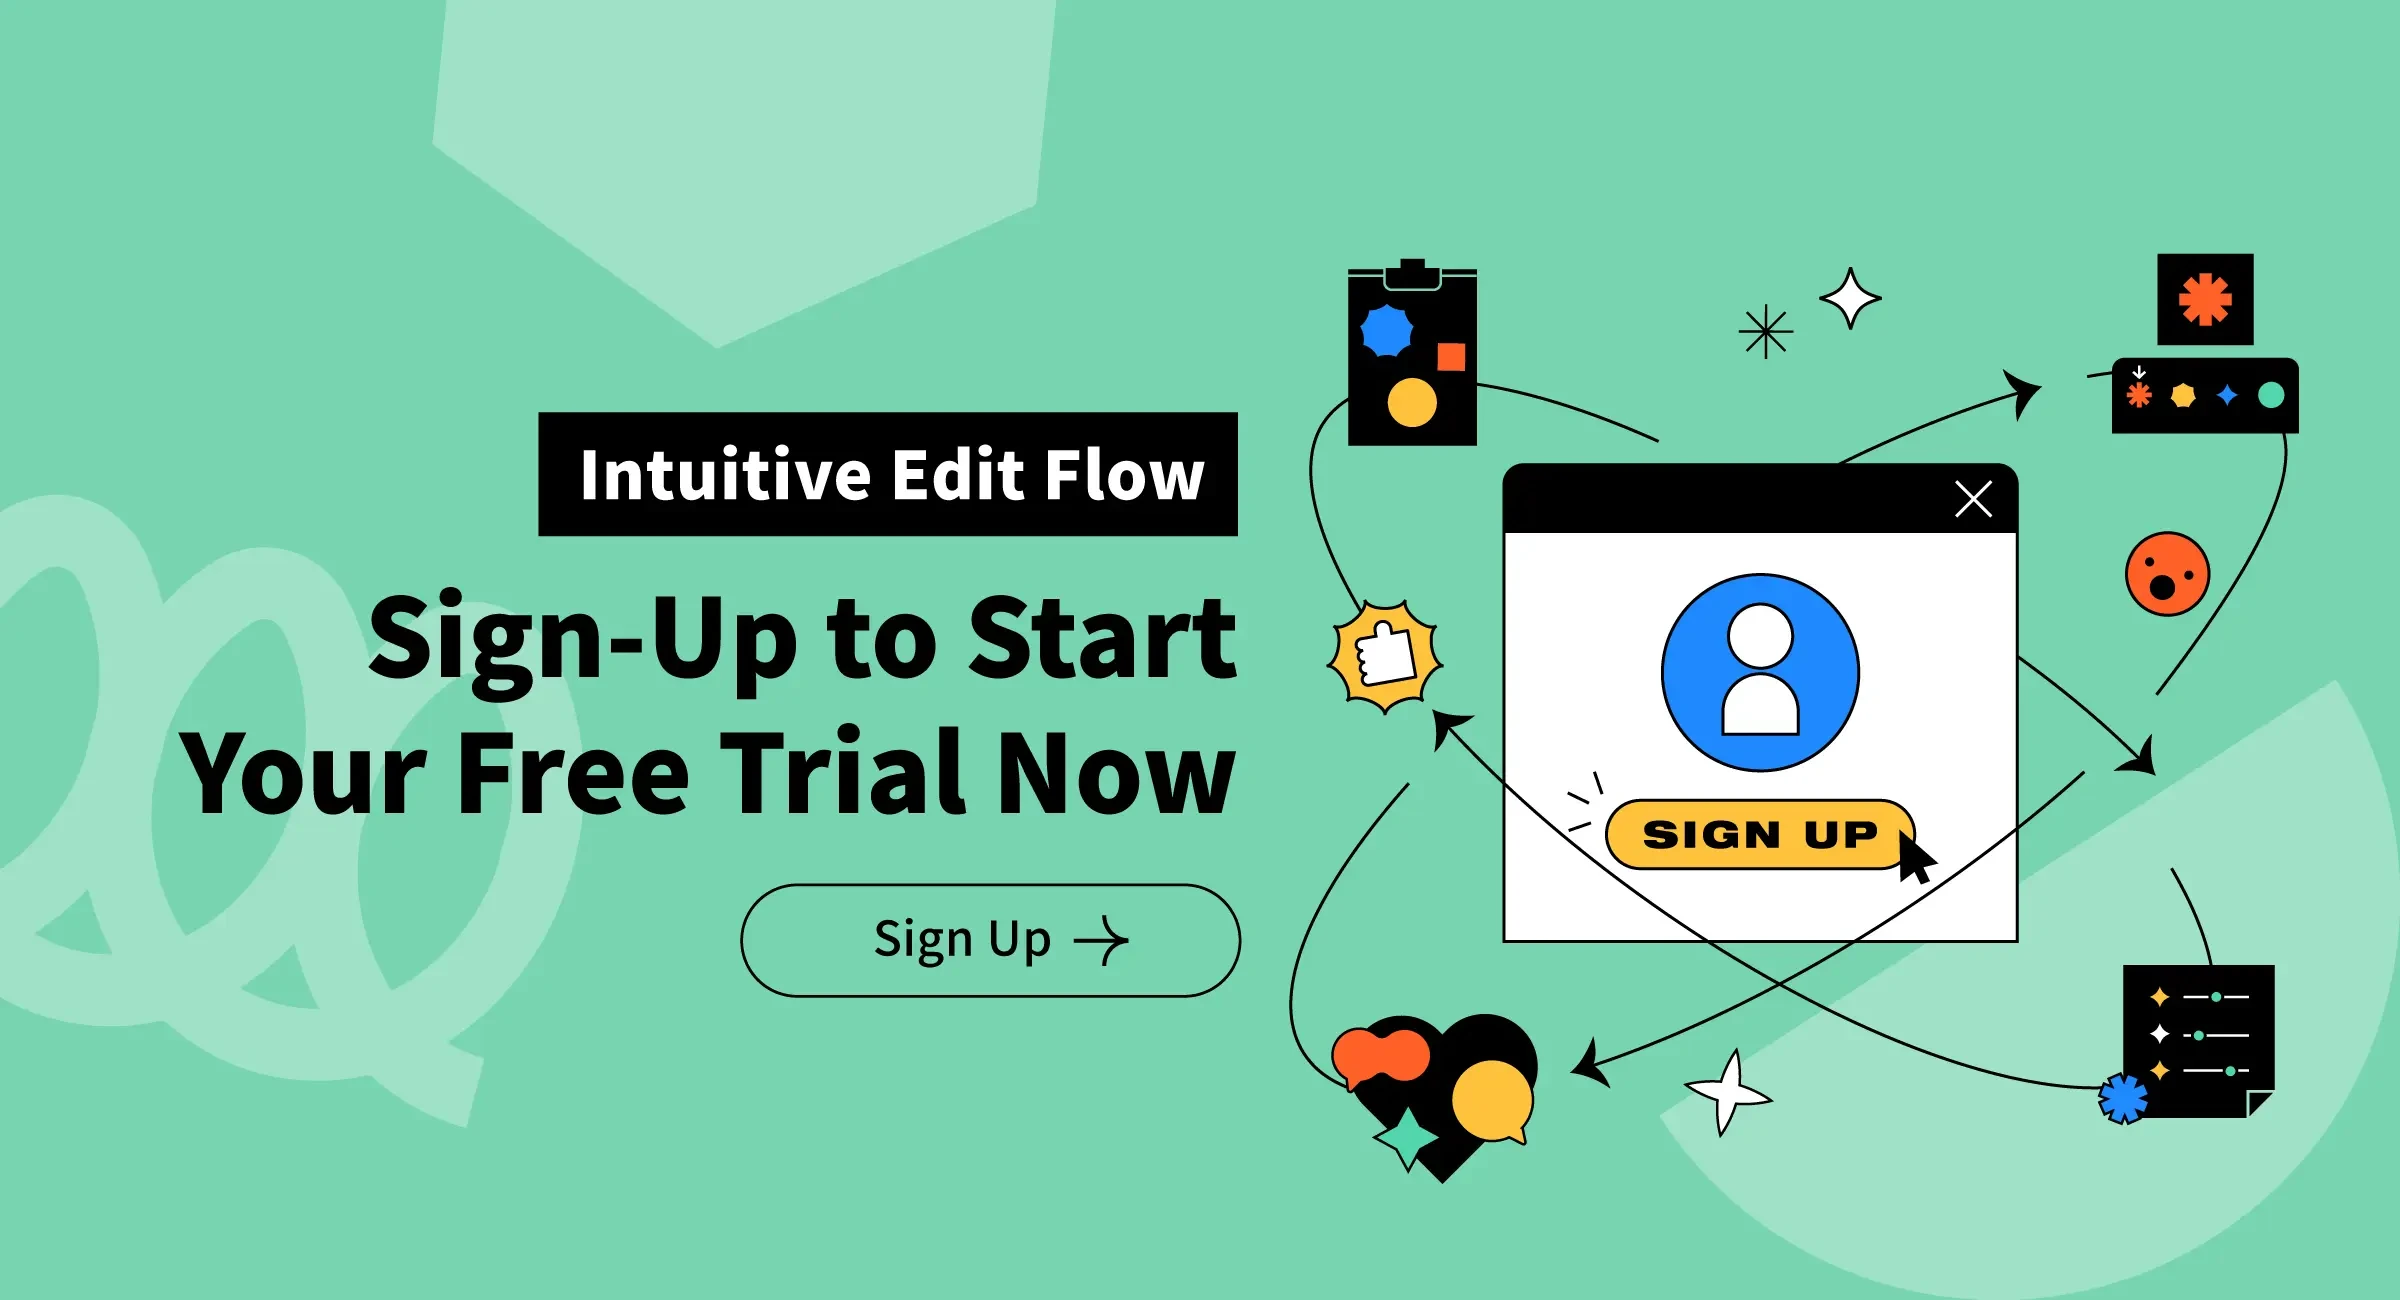 Intuitive Edit Flow, 3-Minute Sign-Up, Start Your Free Trial Now